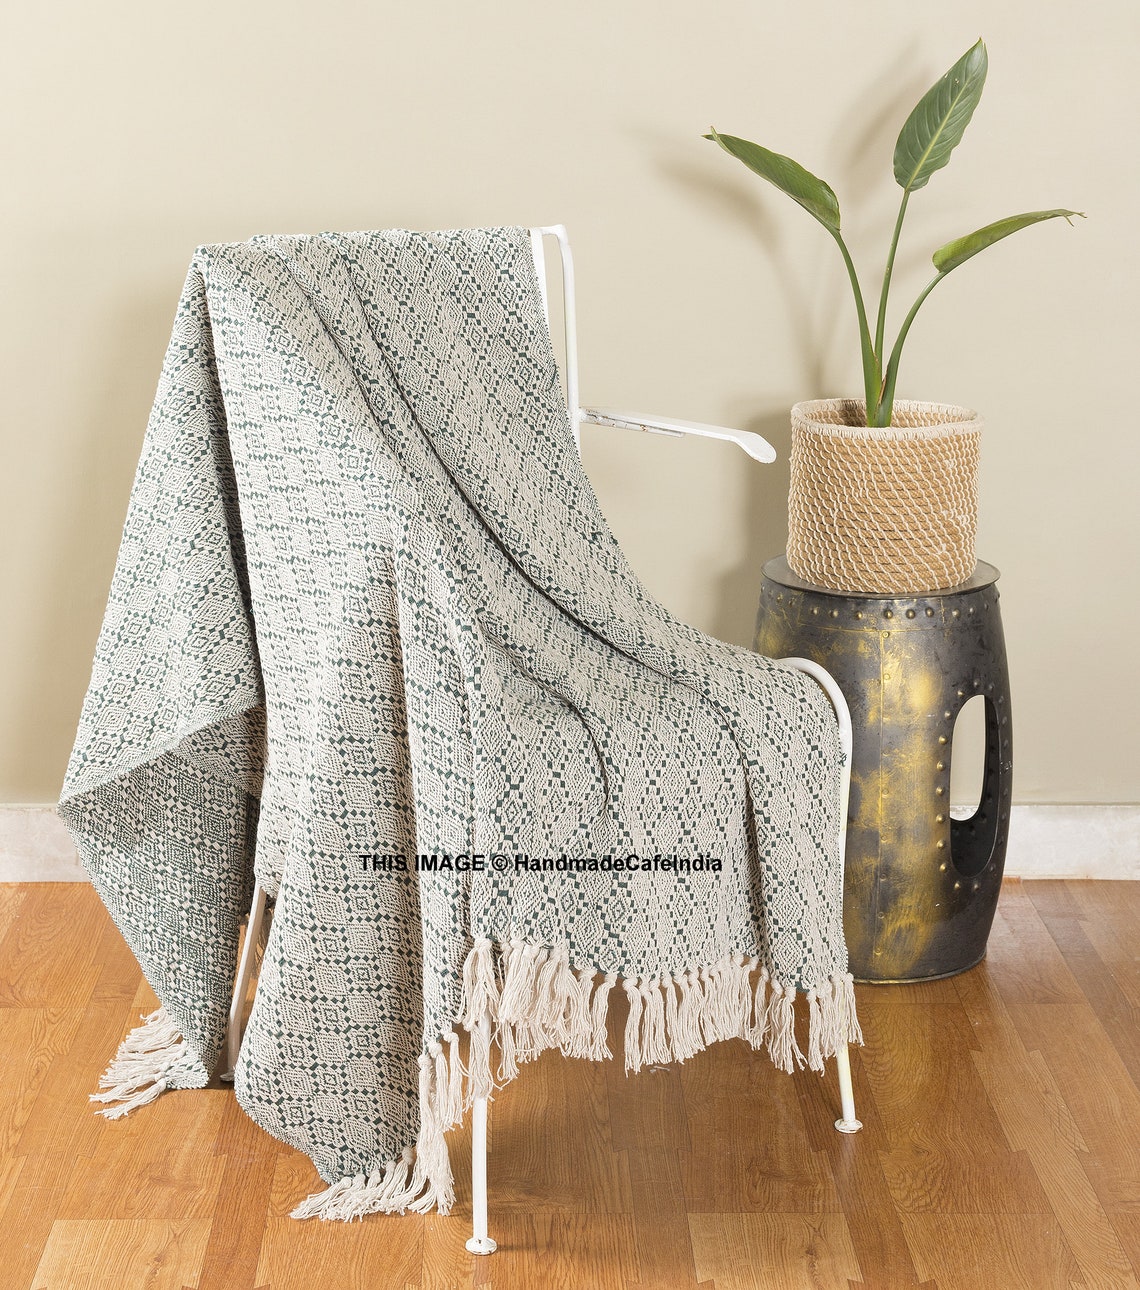 FRINGED COTTON BLANKETS Blankets and Throws Hand Woven - Etsy